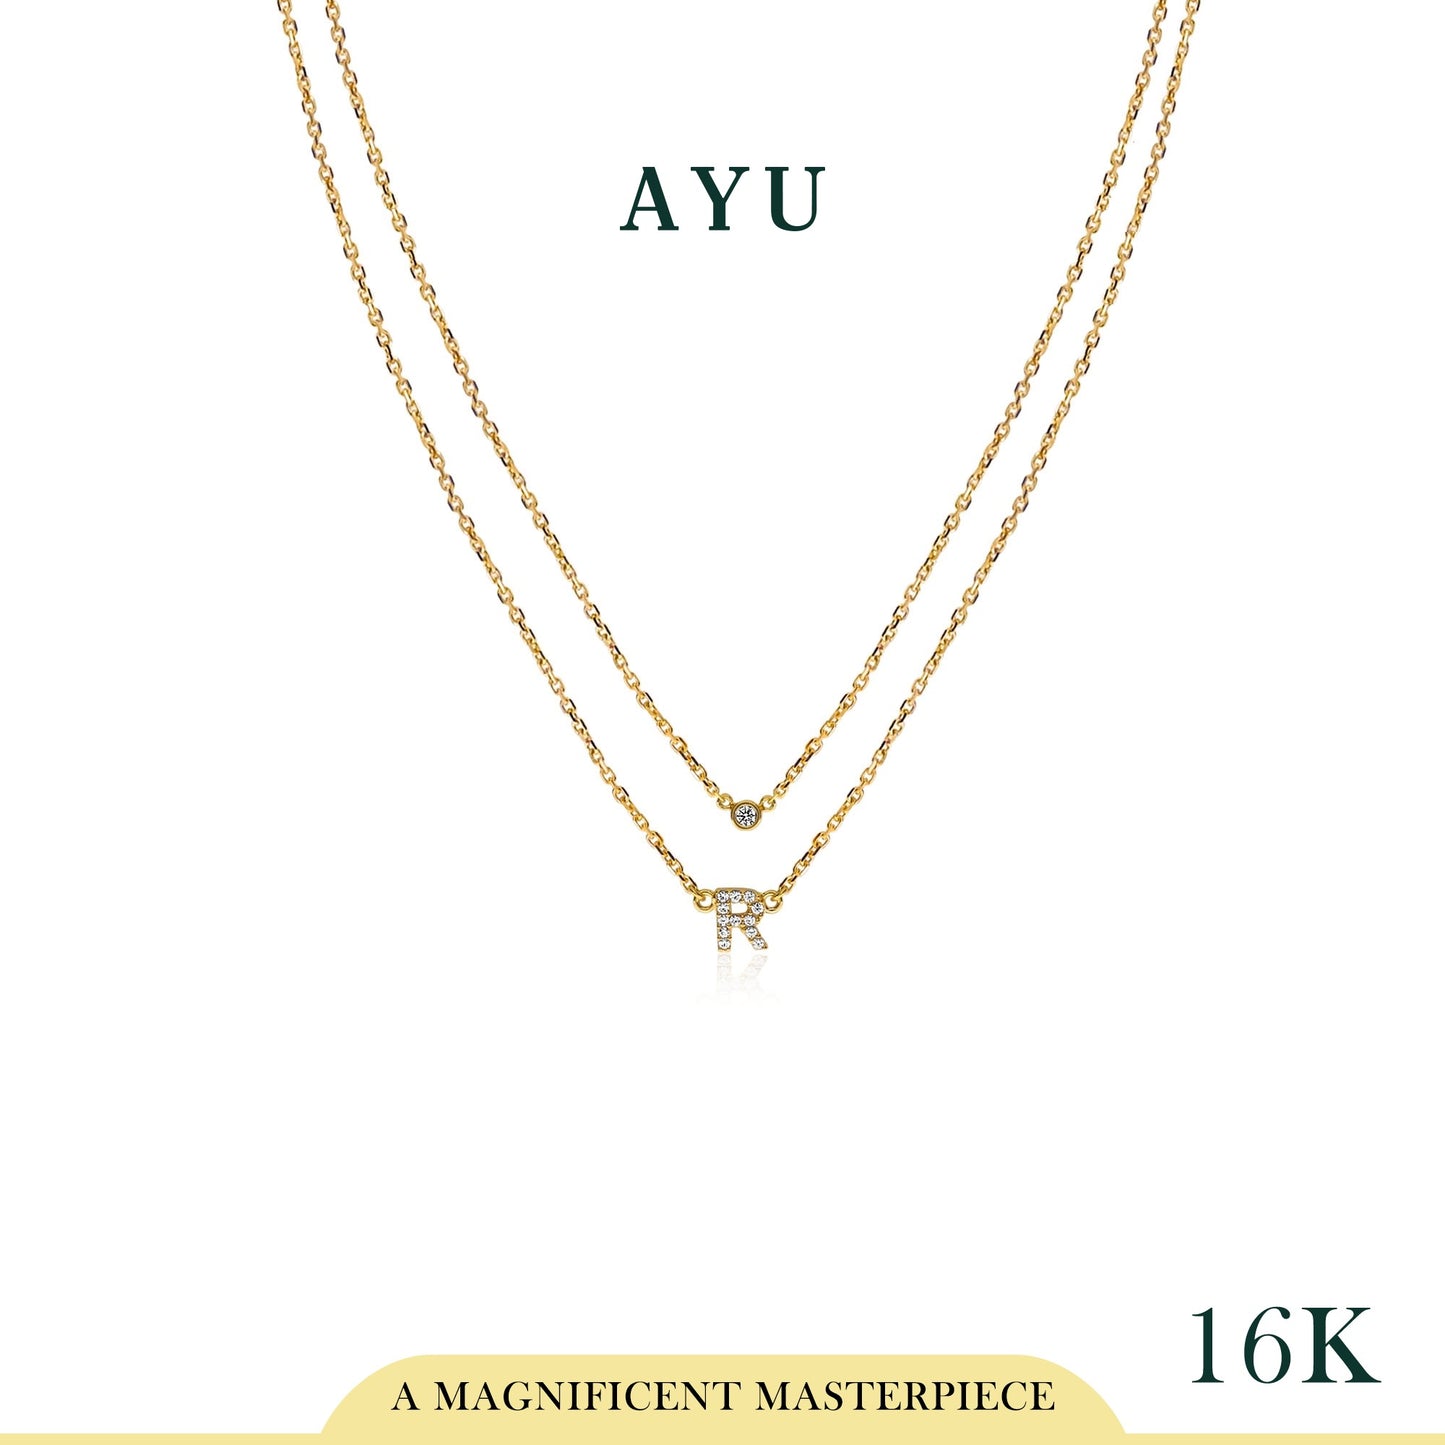 AYU PAVE INITIAL DOUBLE LAYER WITH BEZEL CHAIN NECKLACE 16K YELLOW GOLD